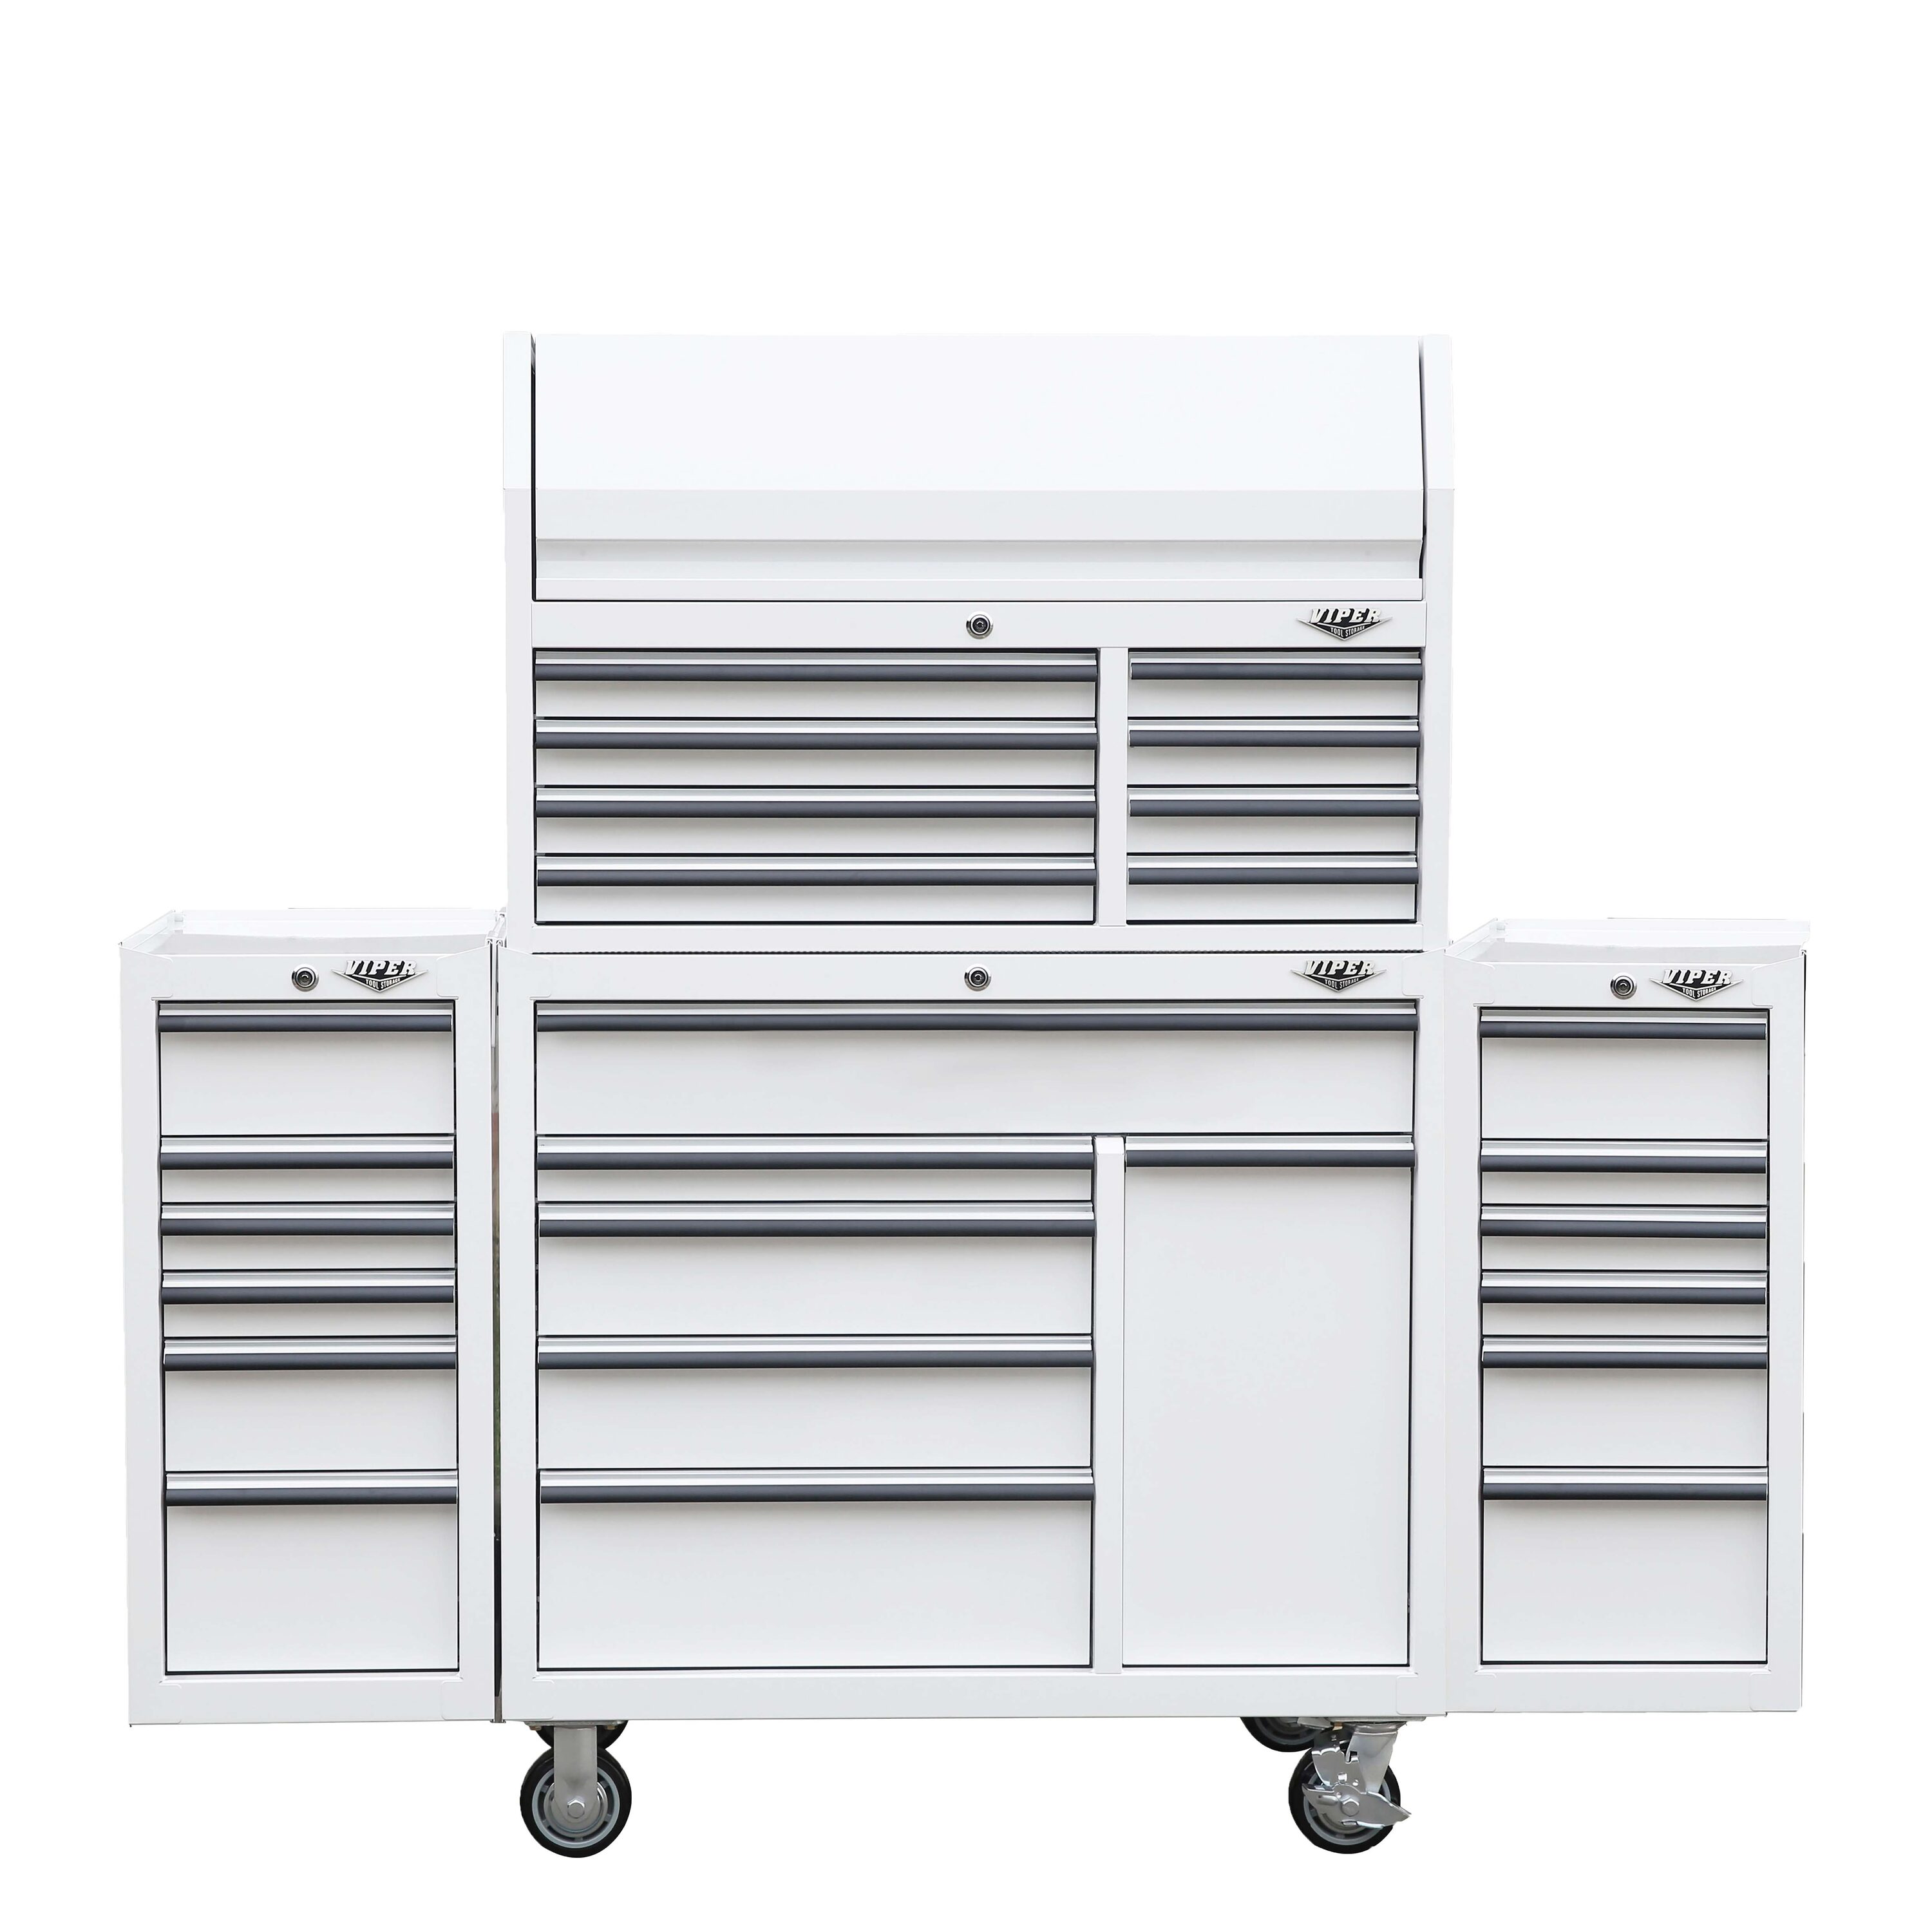 Viper Tool Storage 26.62-in W x 37.5-in H 5-Drawer Steel Rolling